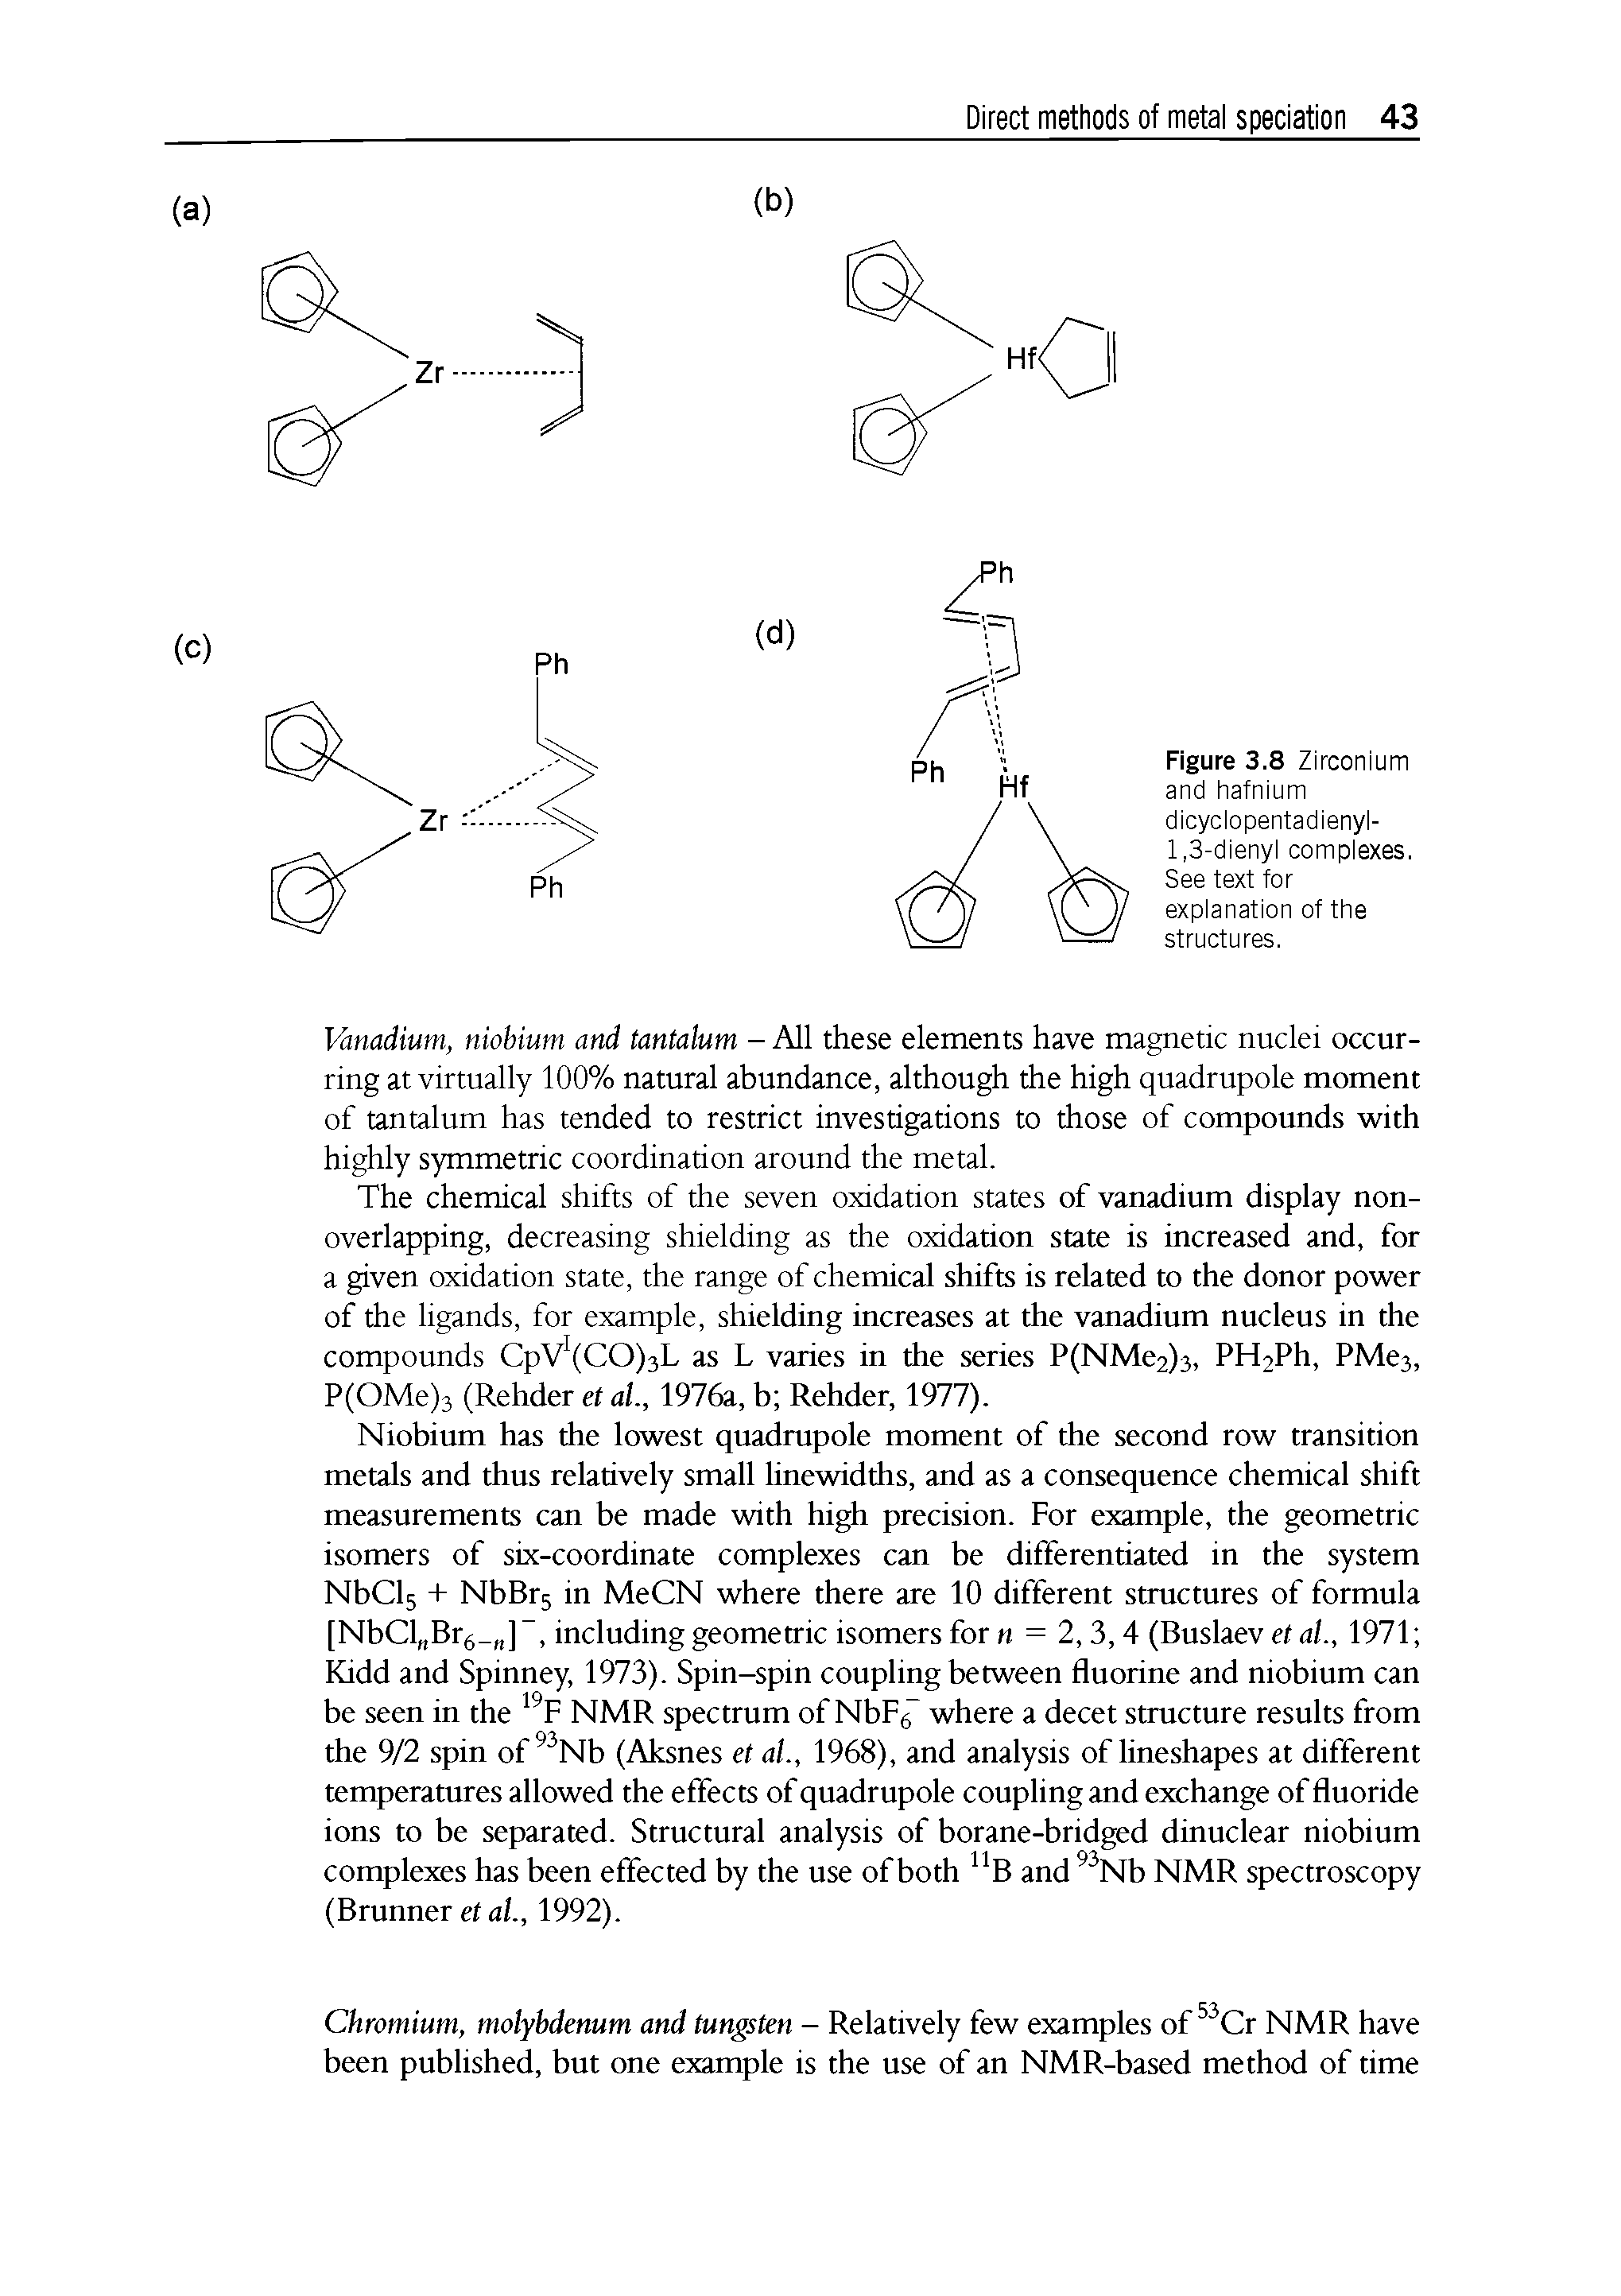 Figure 3.8 Zirconium and hafnium dicyclopentadienyl-1,3-dienyl complexes. See text for explanation of the structures.